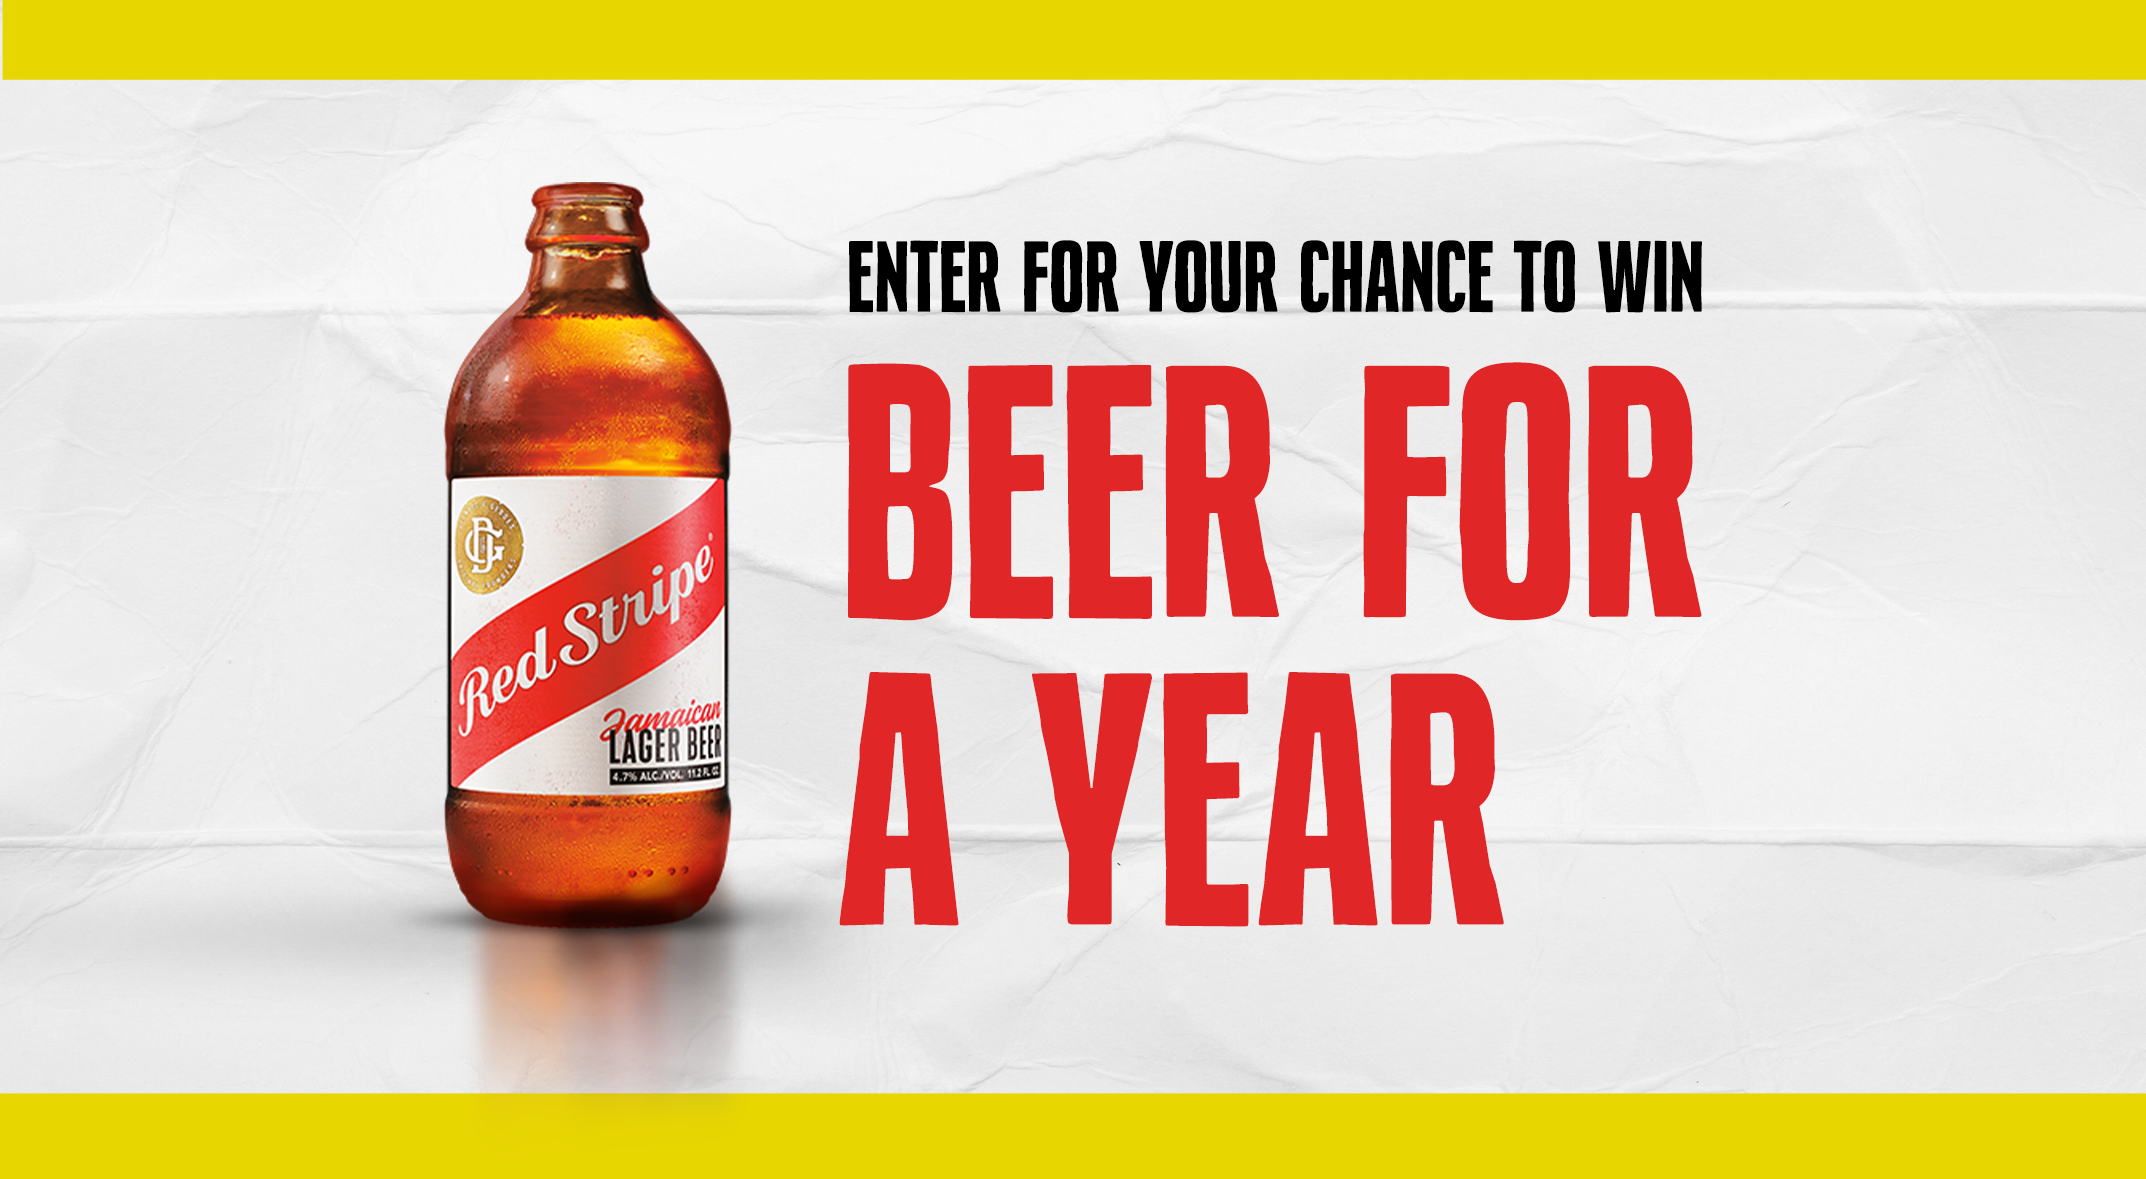 RedStripe Beer For A Year